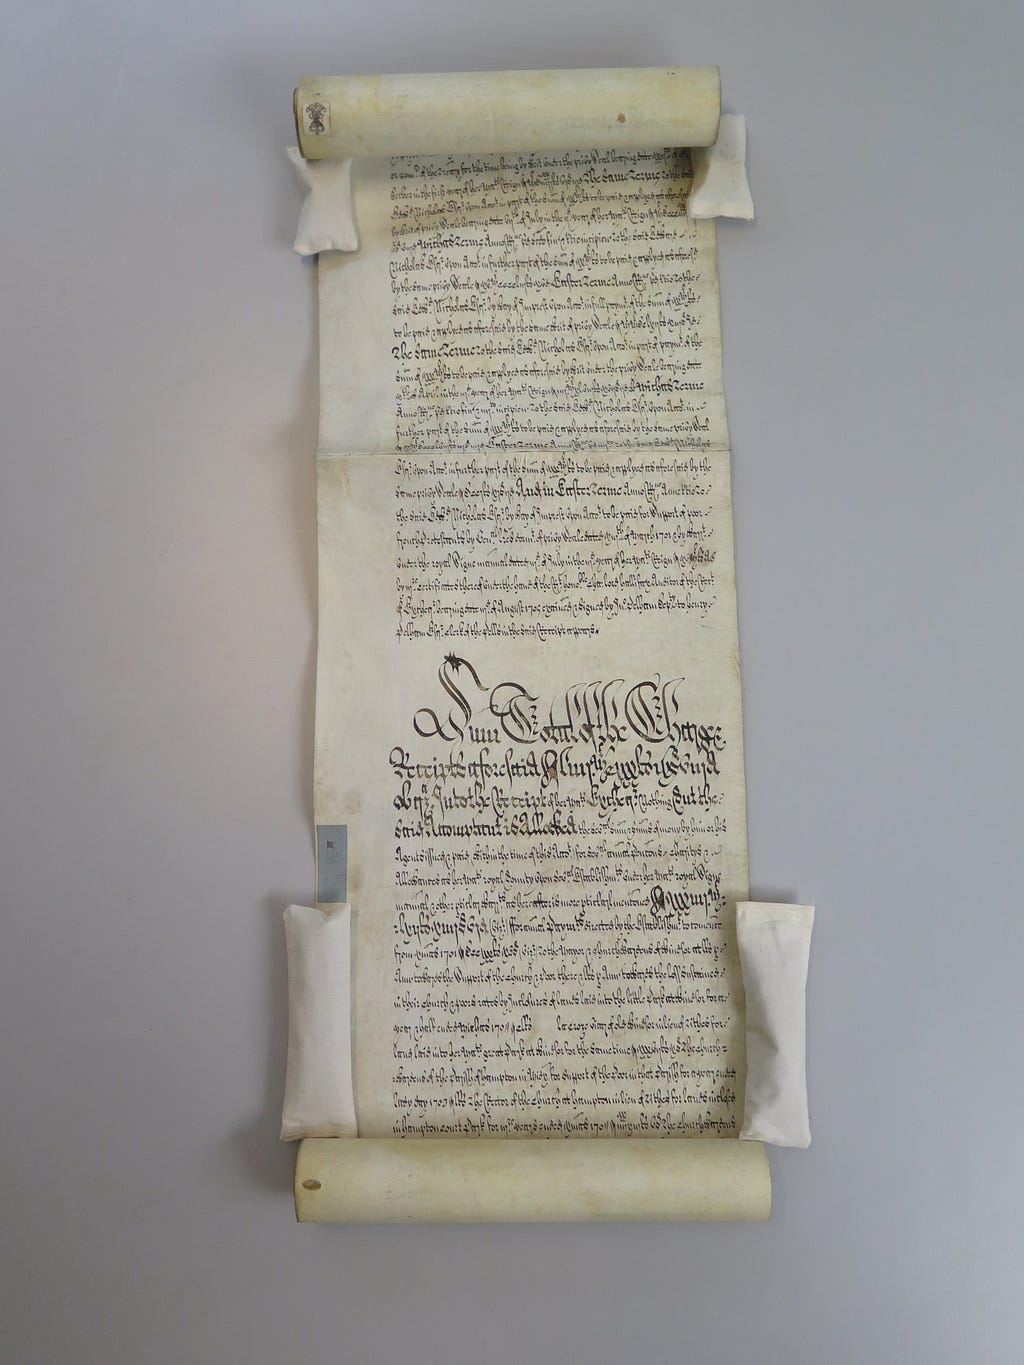 A handwritten parchment scroll which has been unfurled in the middle section and held down by soft weights along the edges.